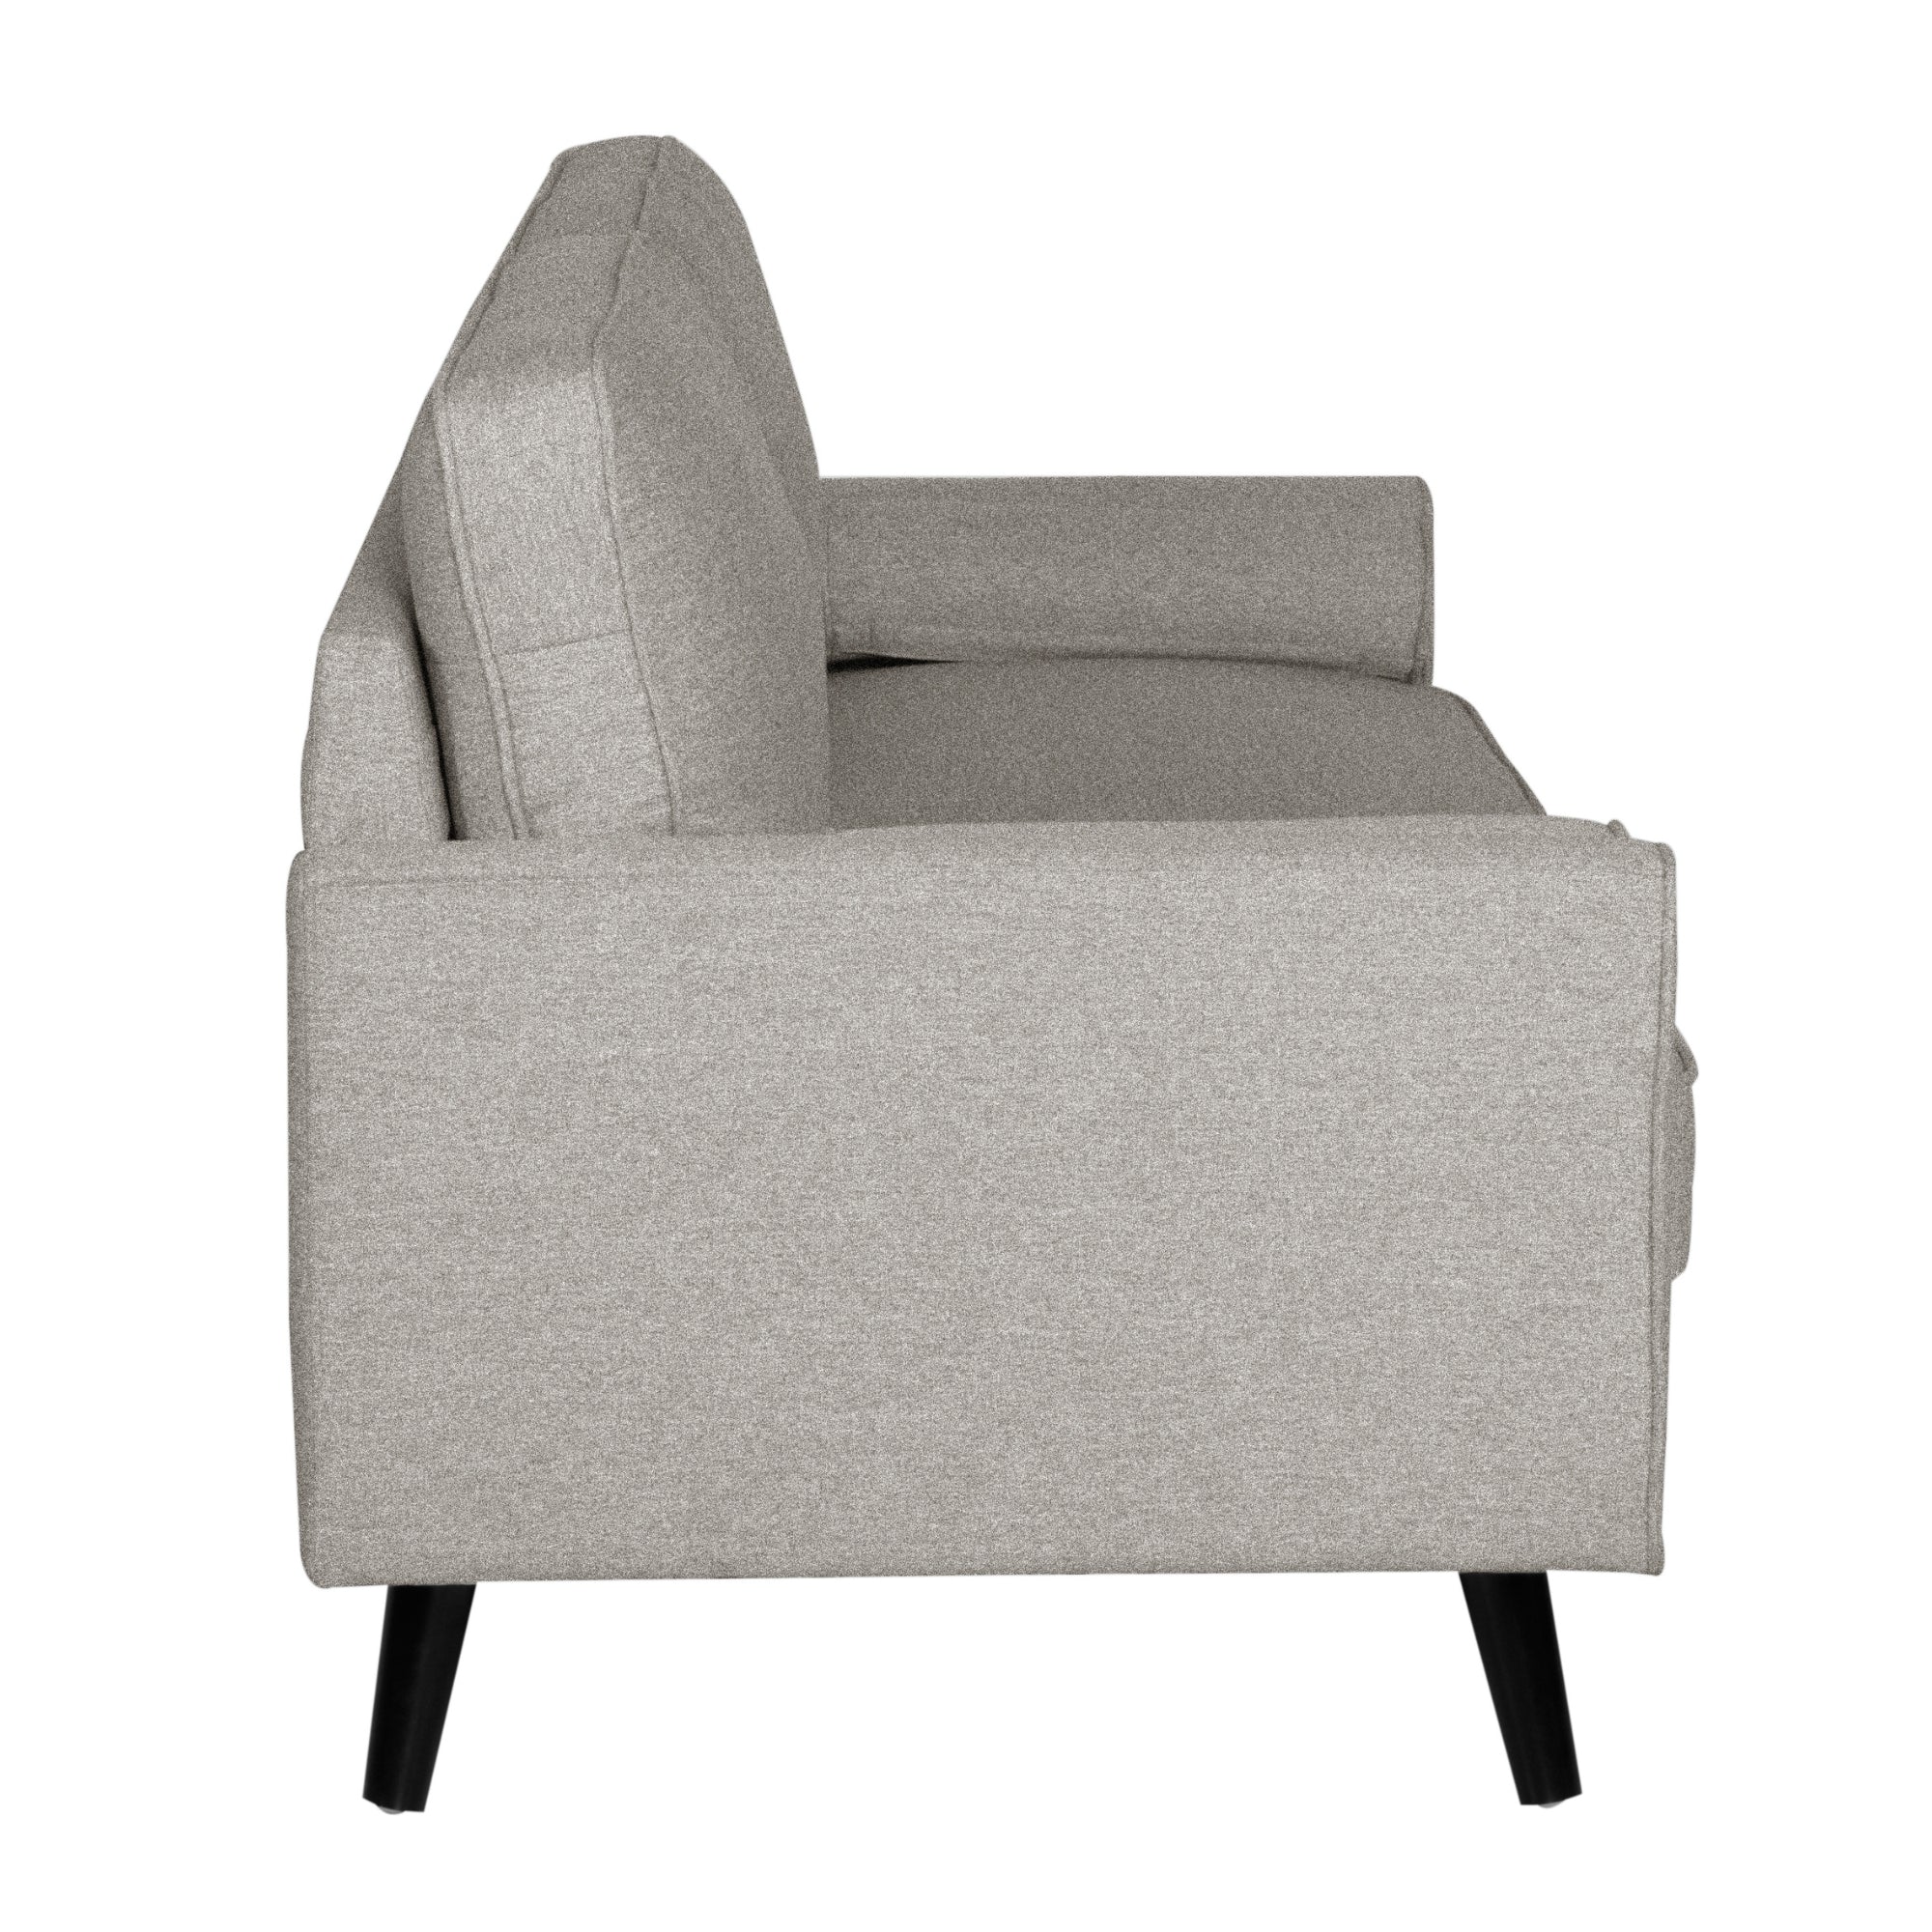 Compact Light Grey 2.5 Seater Sofa with Cushions, Wood Legs